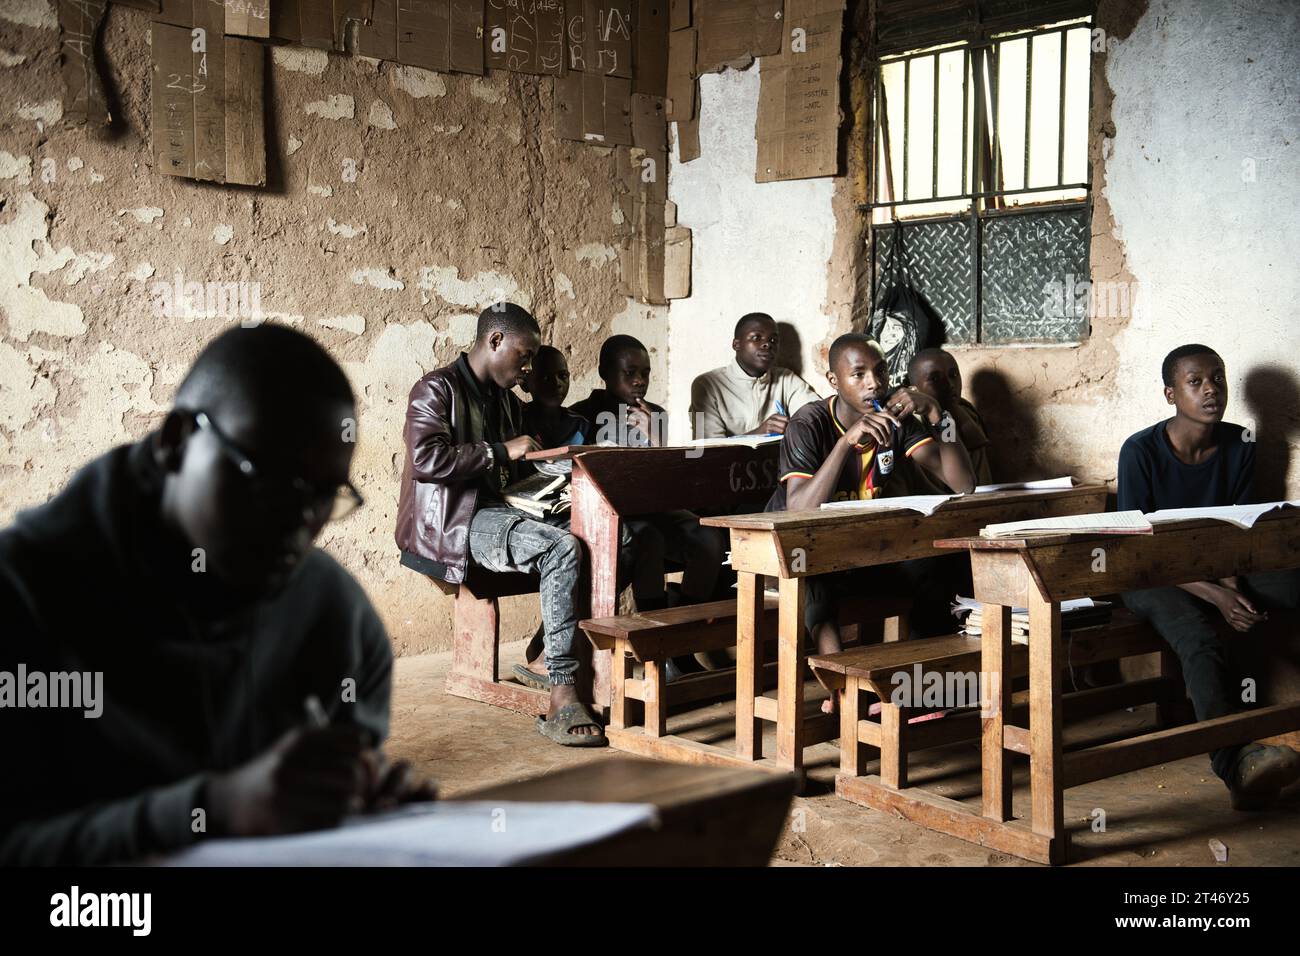 Classroom of boys and girls in a rural school in Uganda, study for their end of term exams in basic surroundings Stock Photo